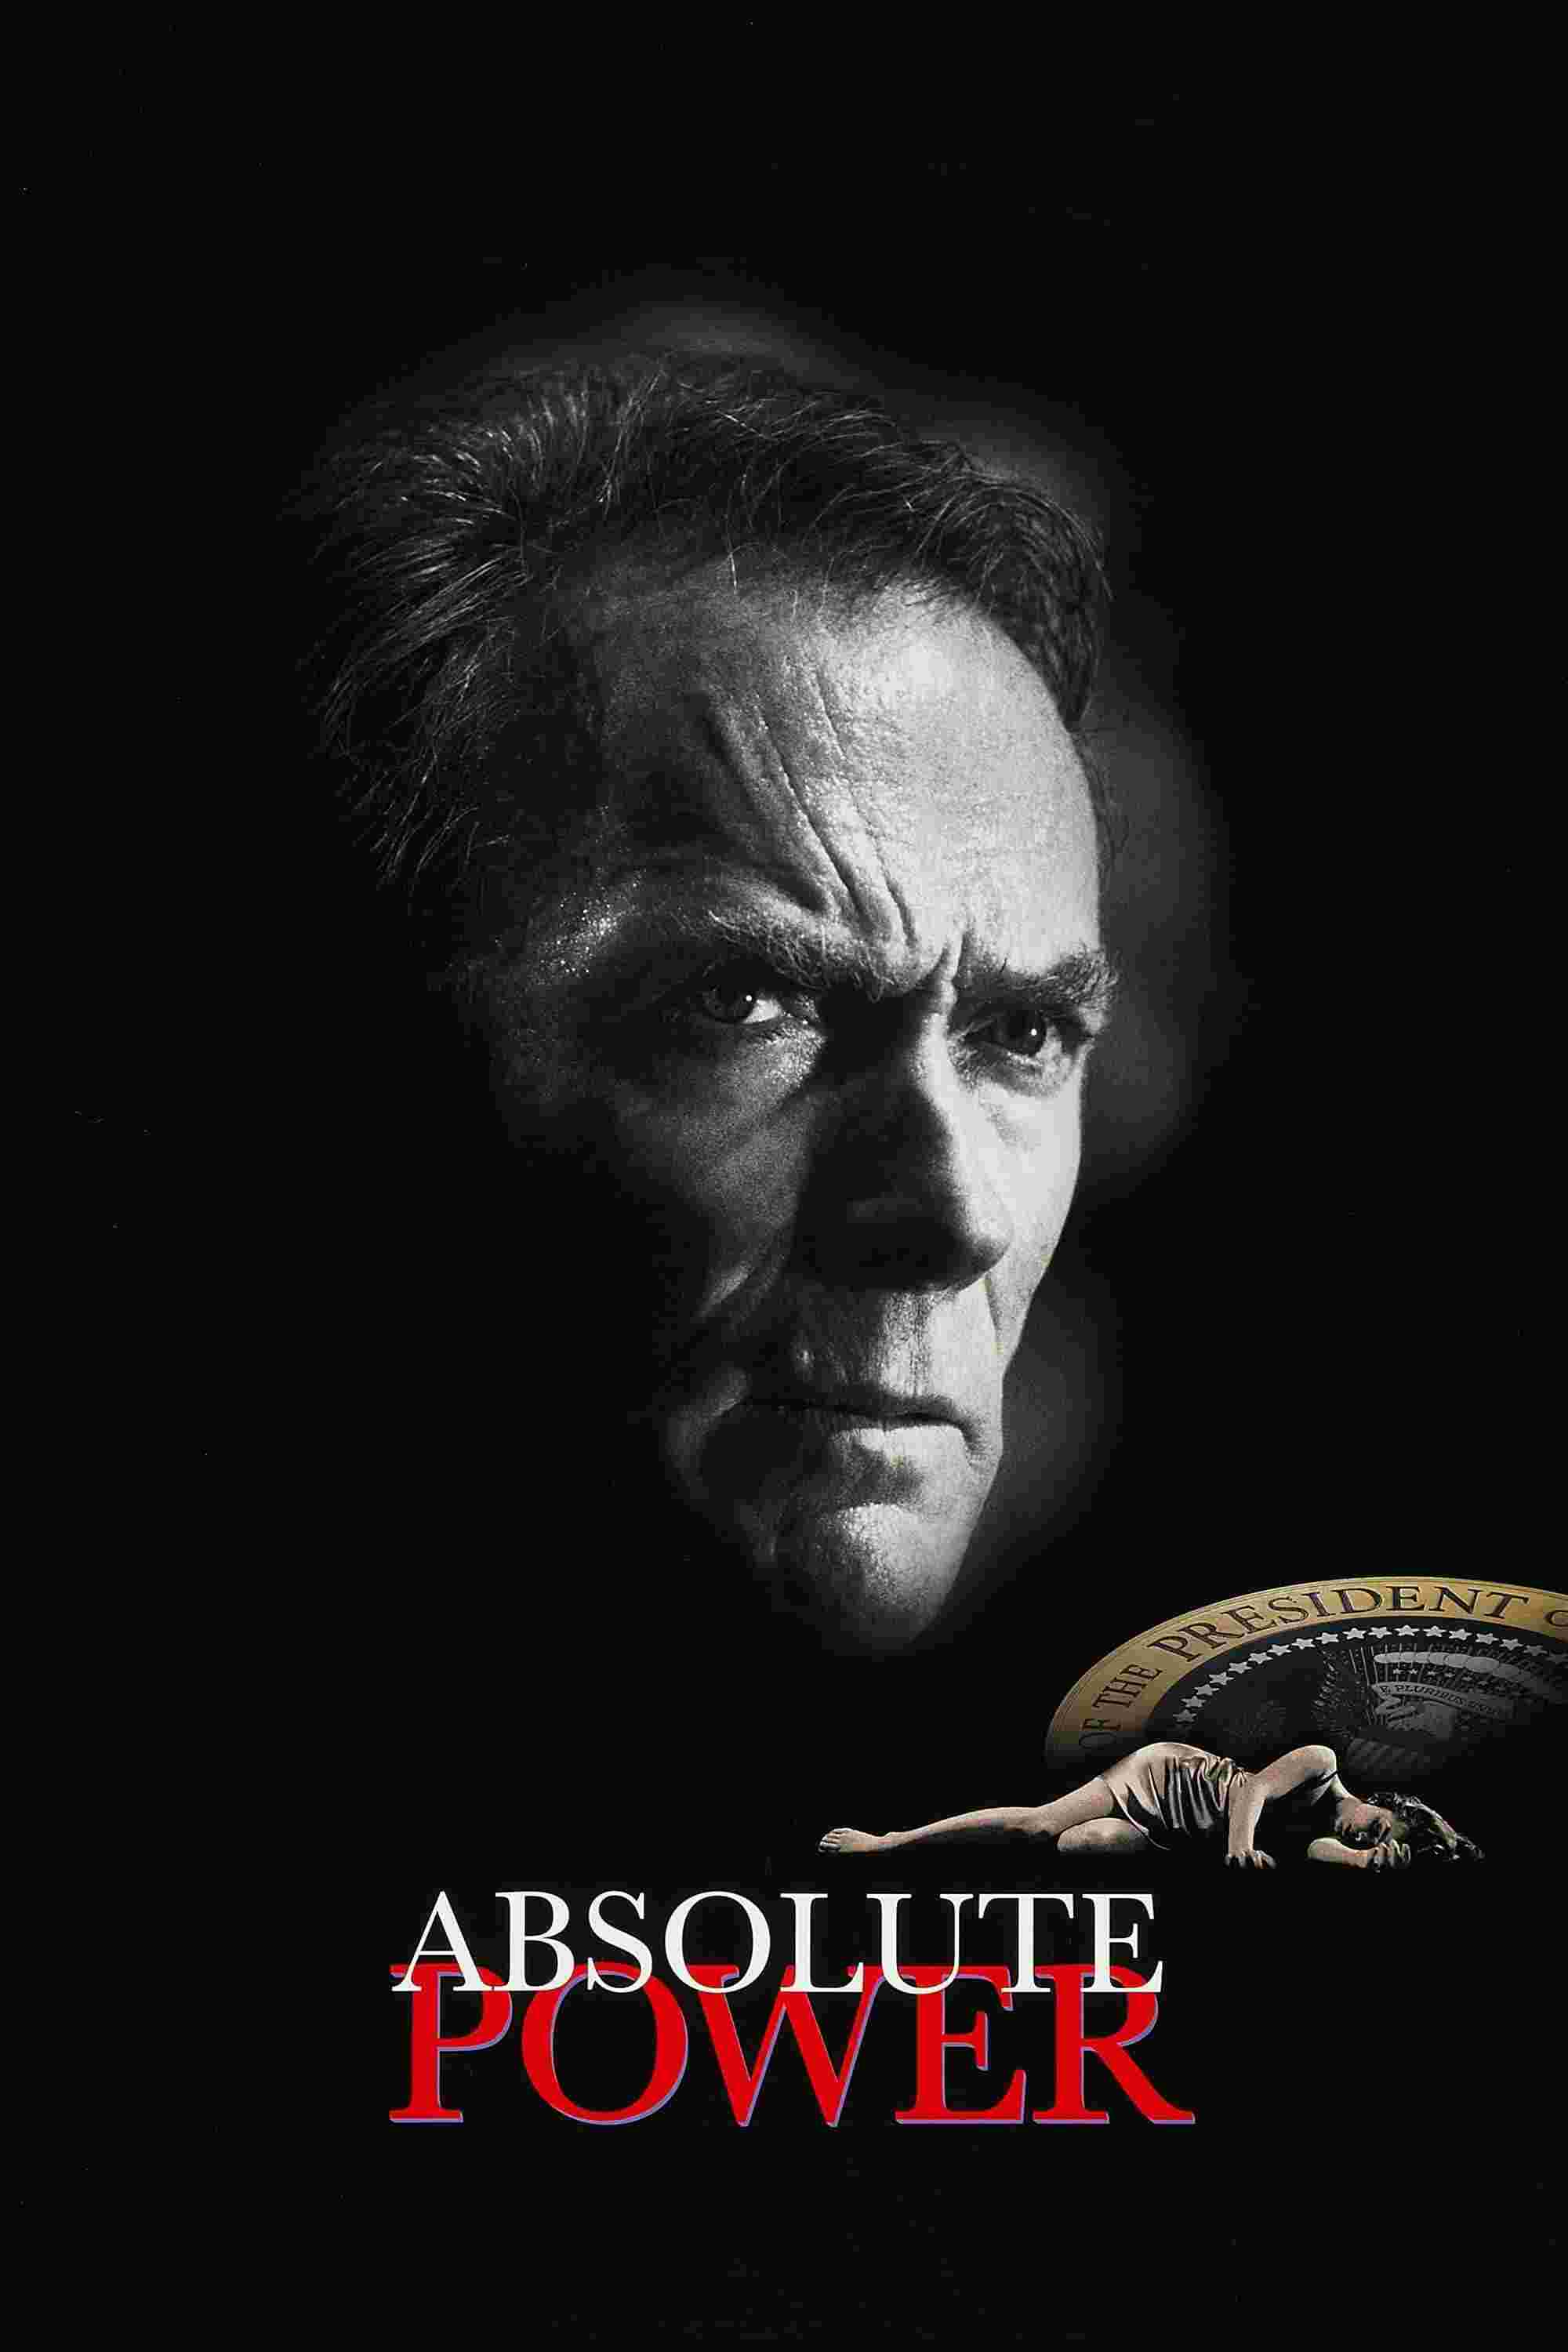 Absolute Power (1997) Clint Eastwood